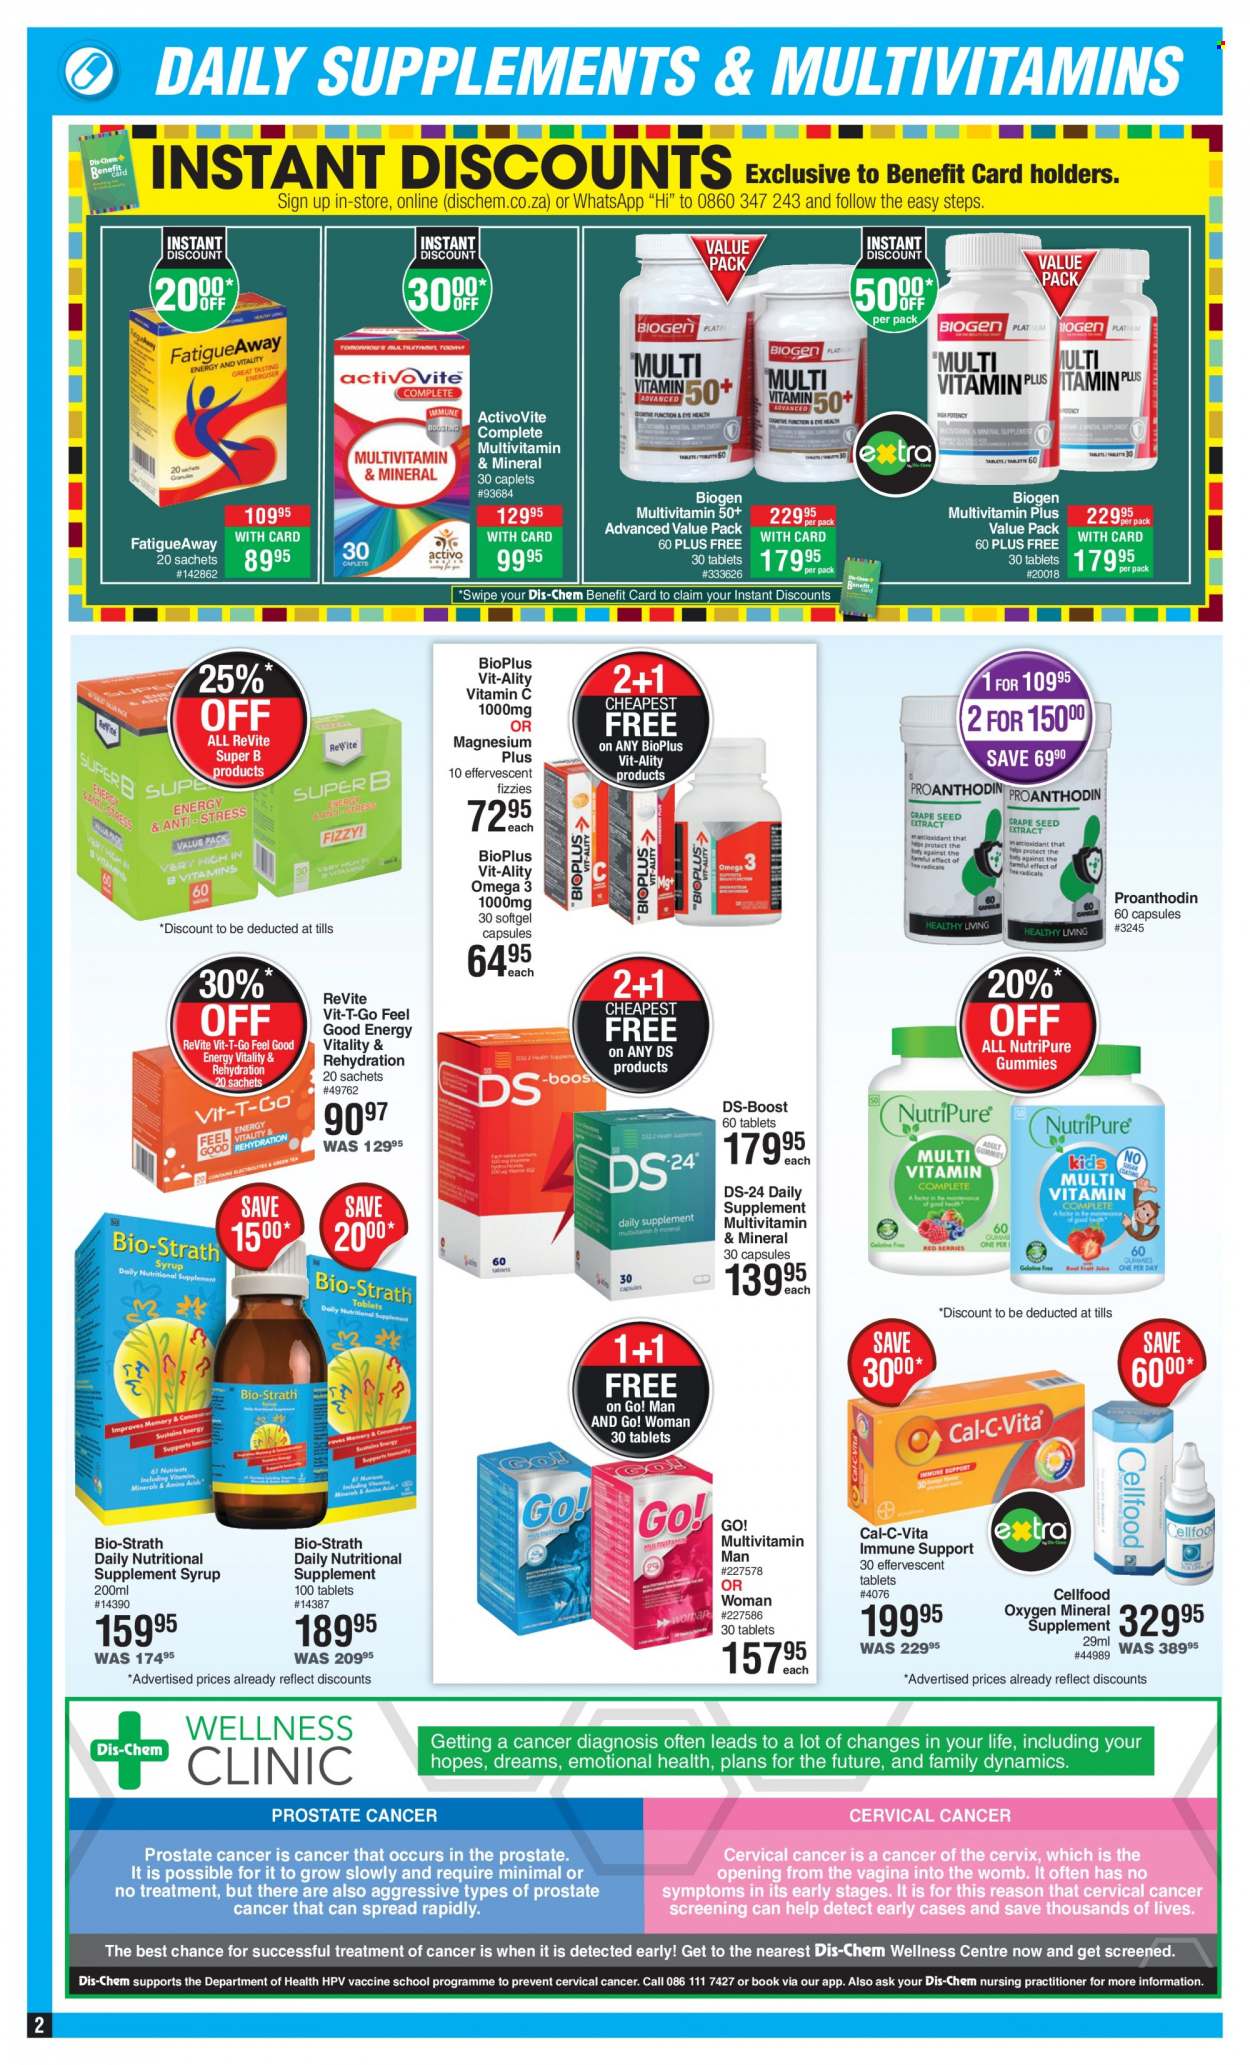 thumbnail - Dis-Chem catalogue  - 12/01/2023 - 12/02/2023 - Sales products - magnesium, multivitamin, vitamin c, Omega-3, syrup, nutritional supplement, Cal-C-Vita, Go!, Bio-Strath, Activovite, Cellfood, DS-Boost. Page 2.